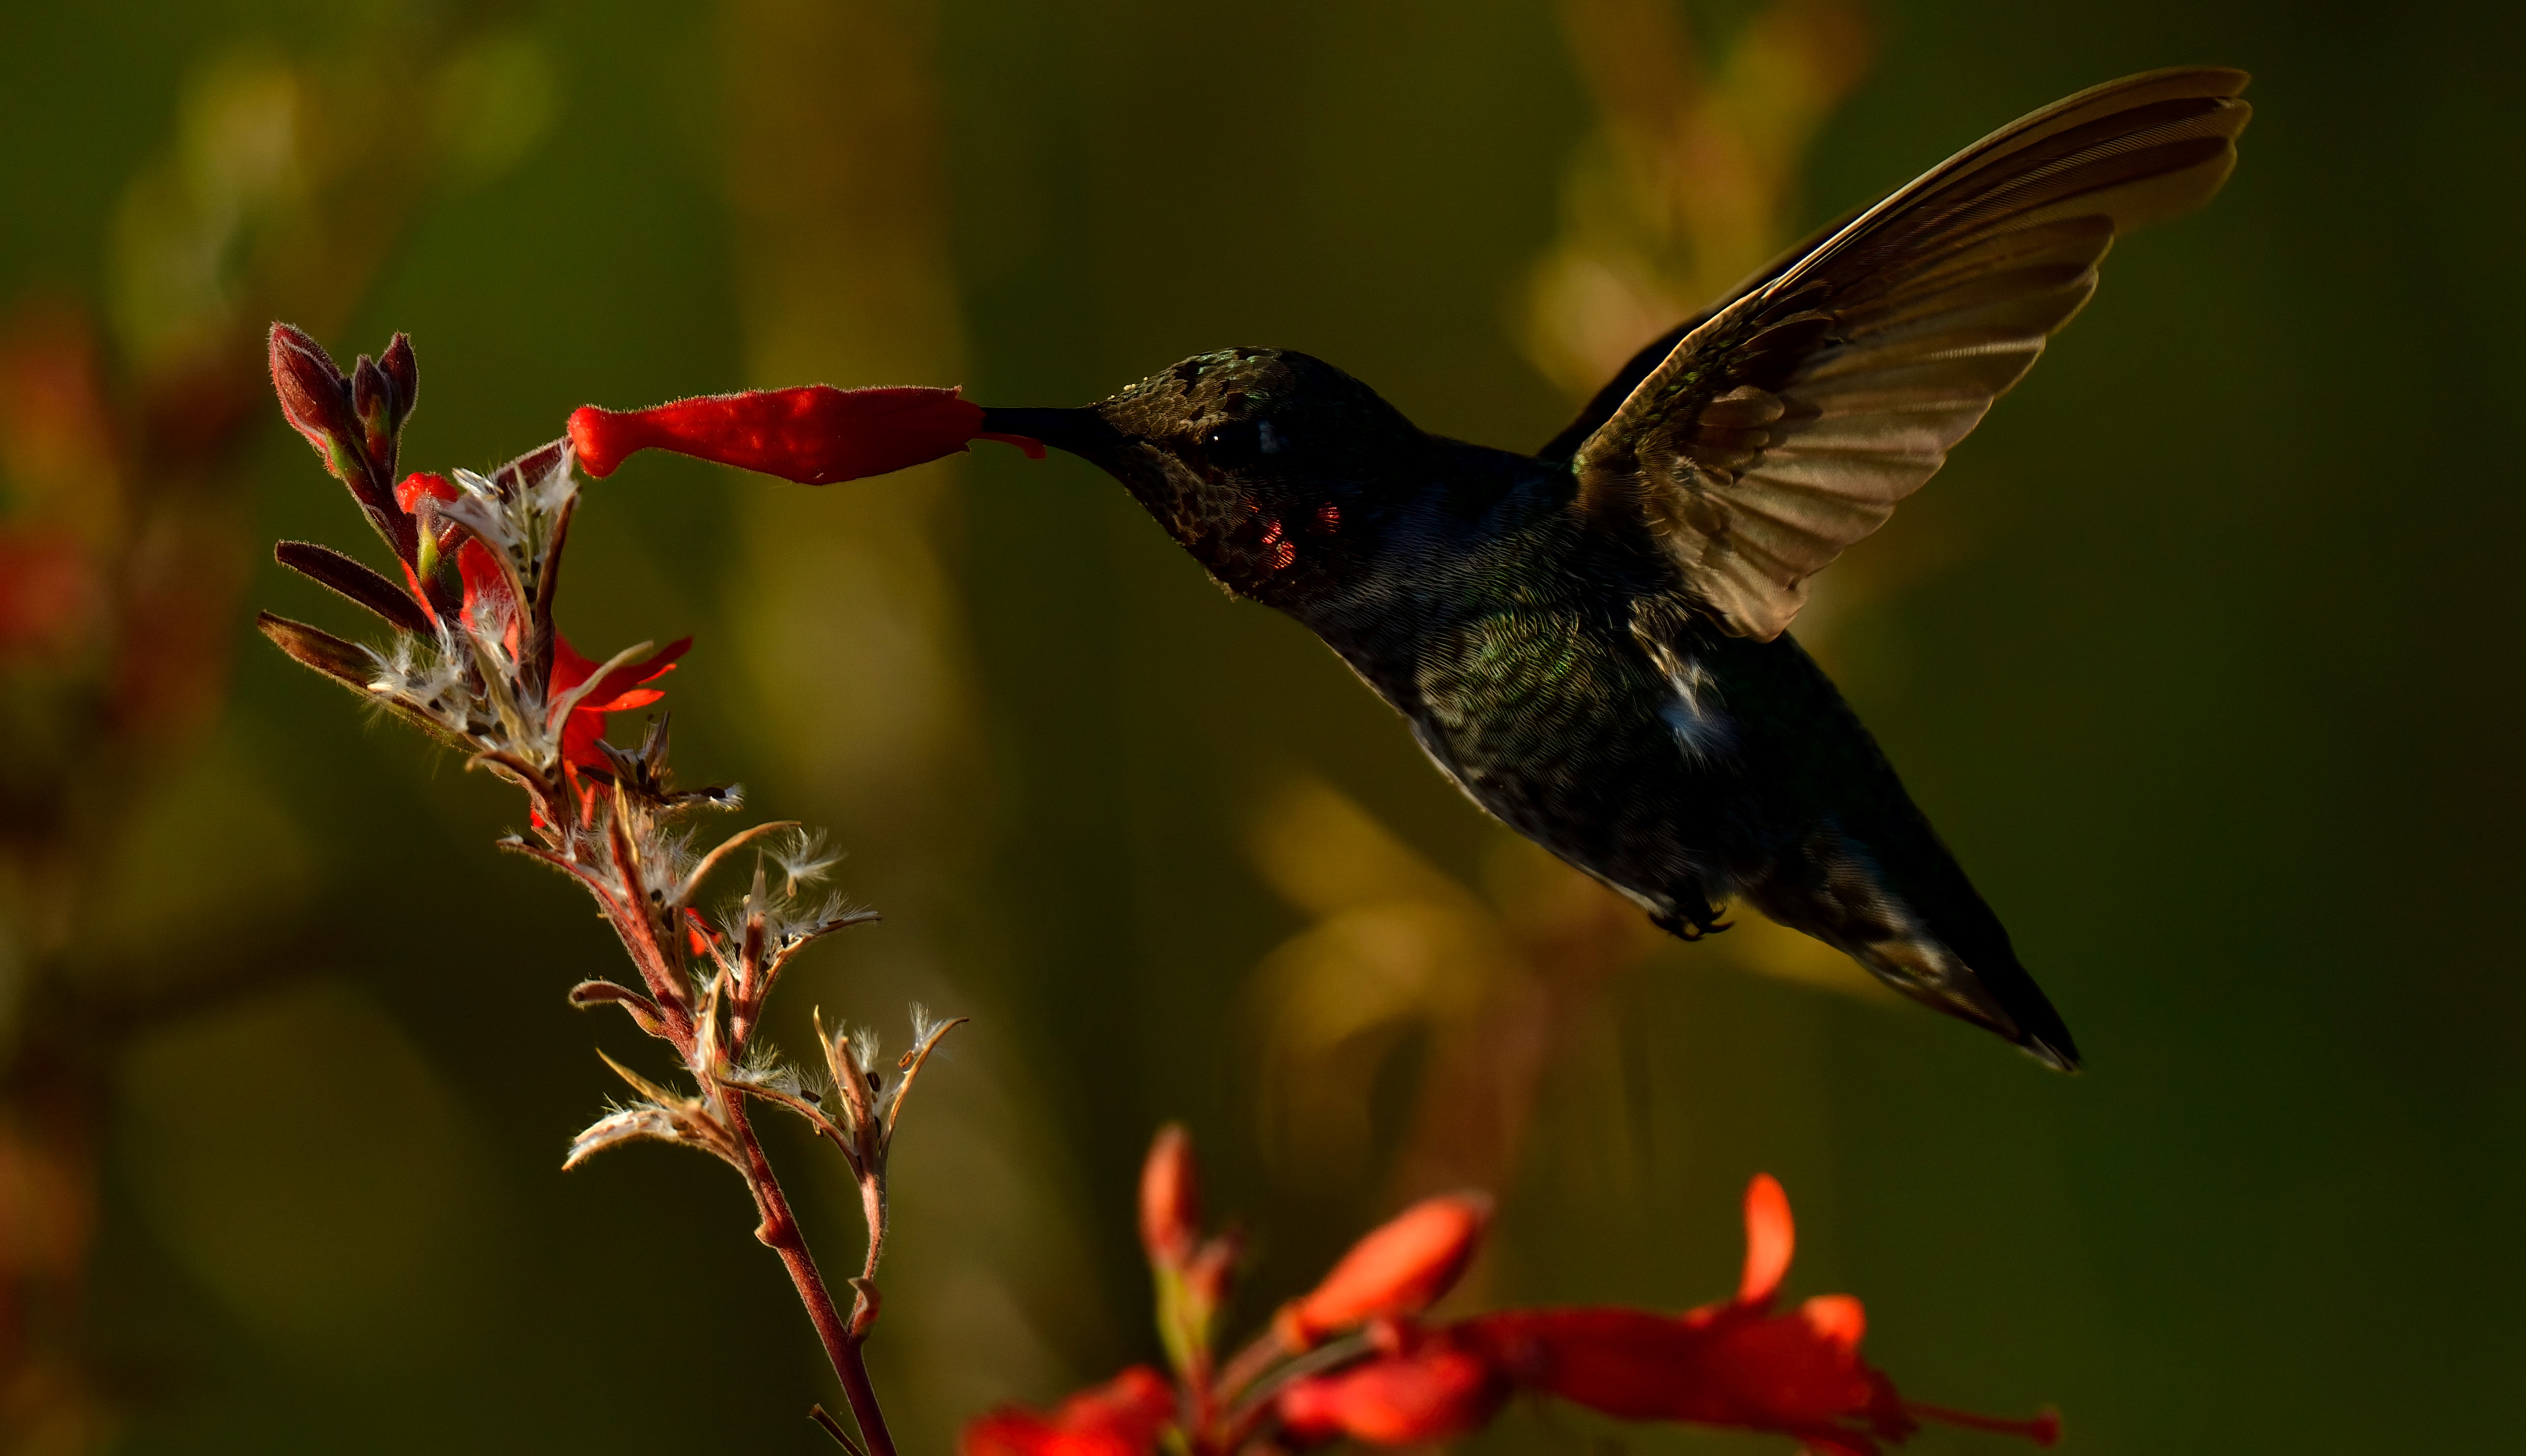 A hummingbird feeds from a flowering plant at Arrowhead Marsh in Oakland, CA.